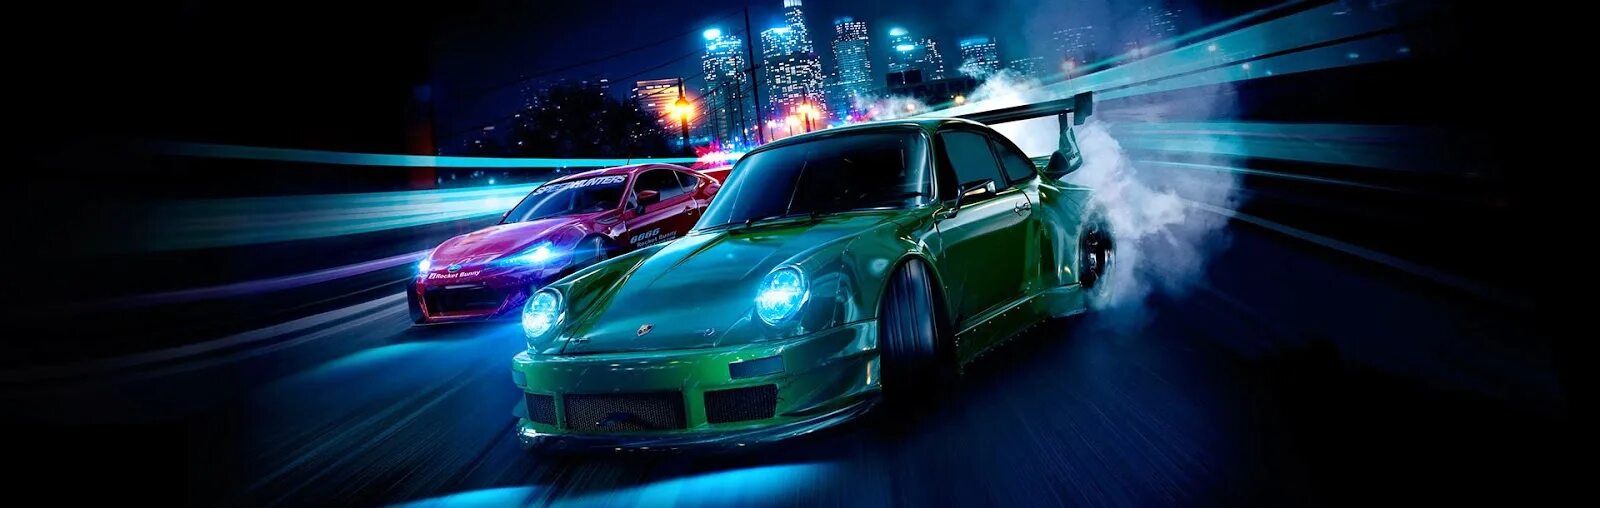 Need for Speed 2015 требования. STOPGAME NFS. Auto Tuning. Fast and Furious Wallpaper.